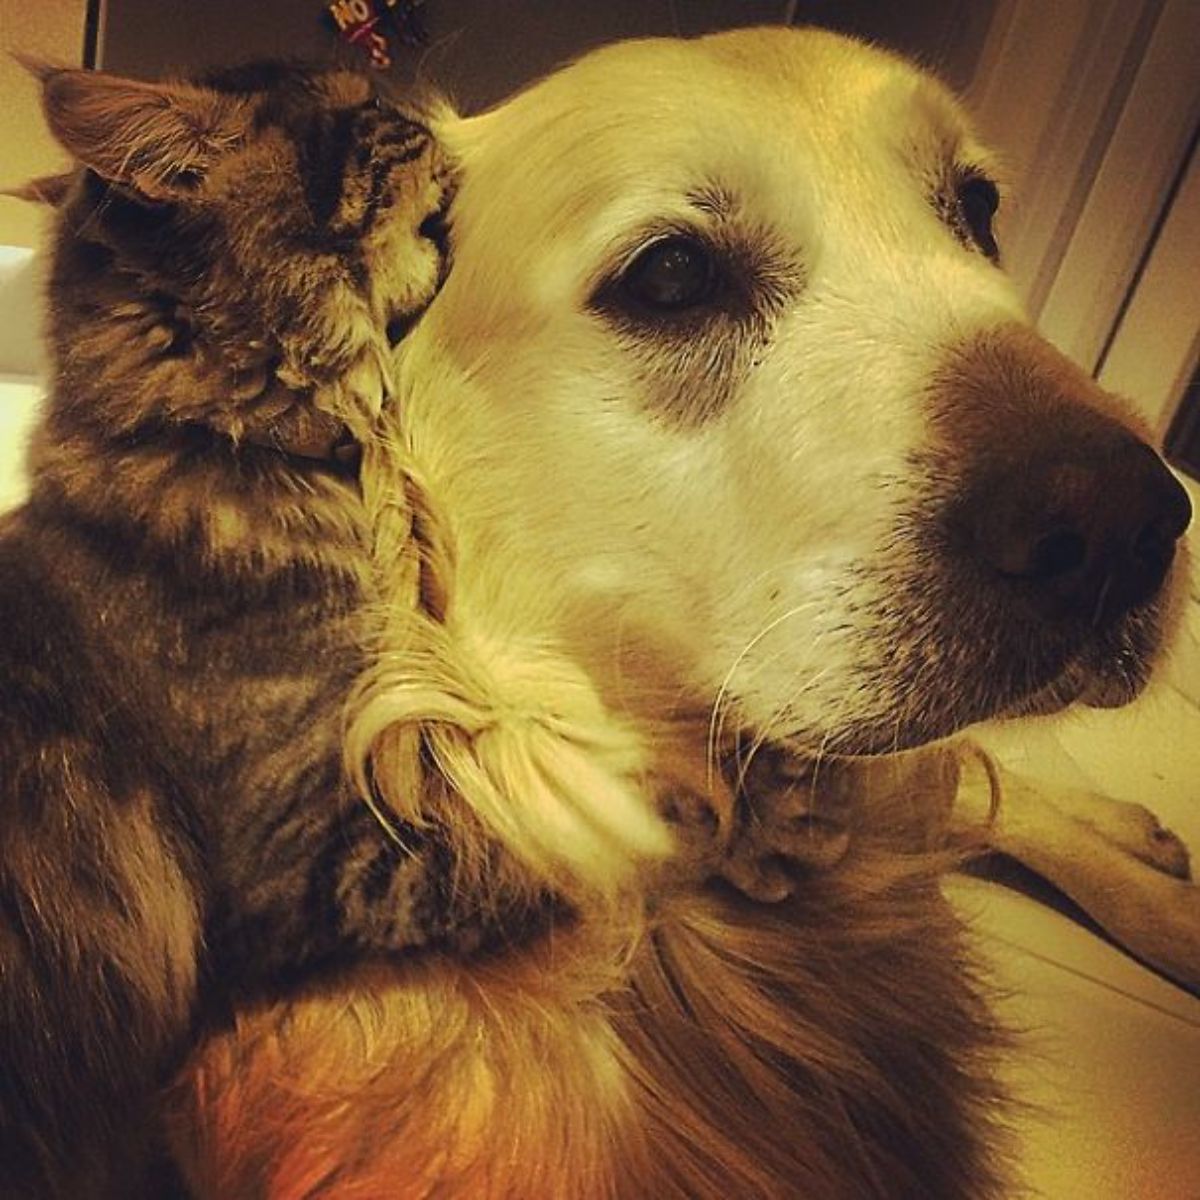 grey tabby cat with the face nuzzled in the ear of a golden retriever